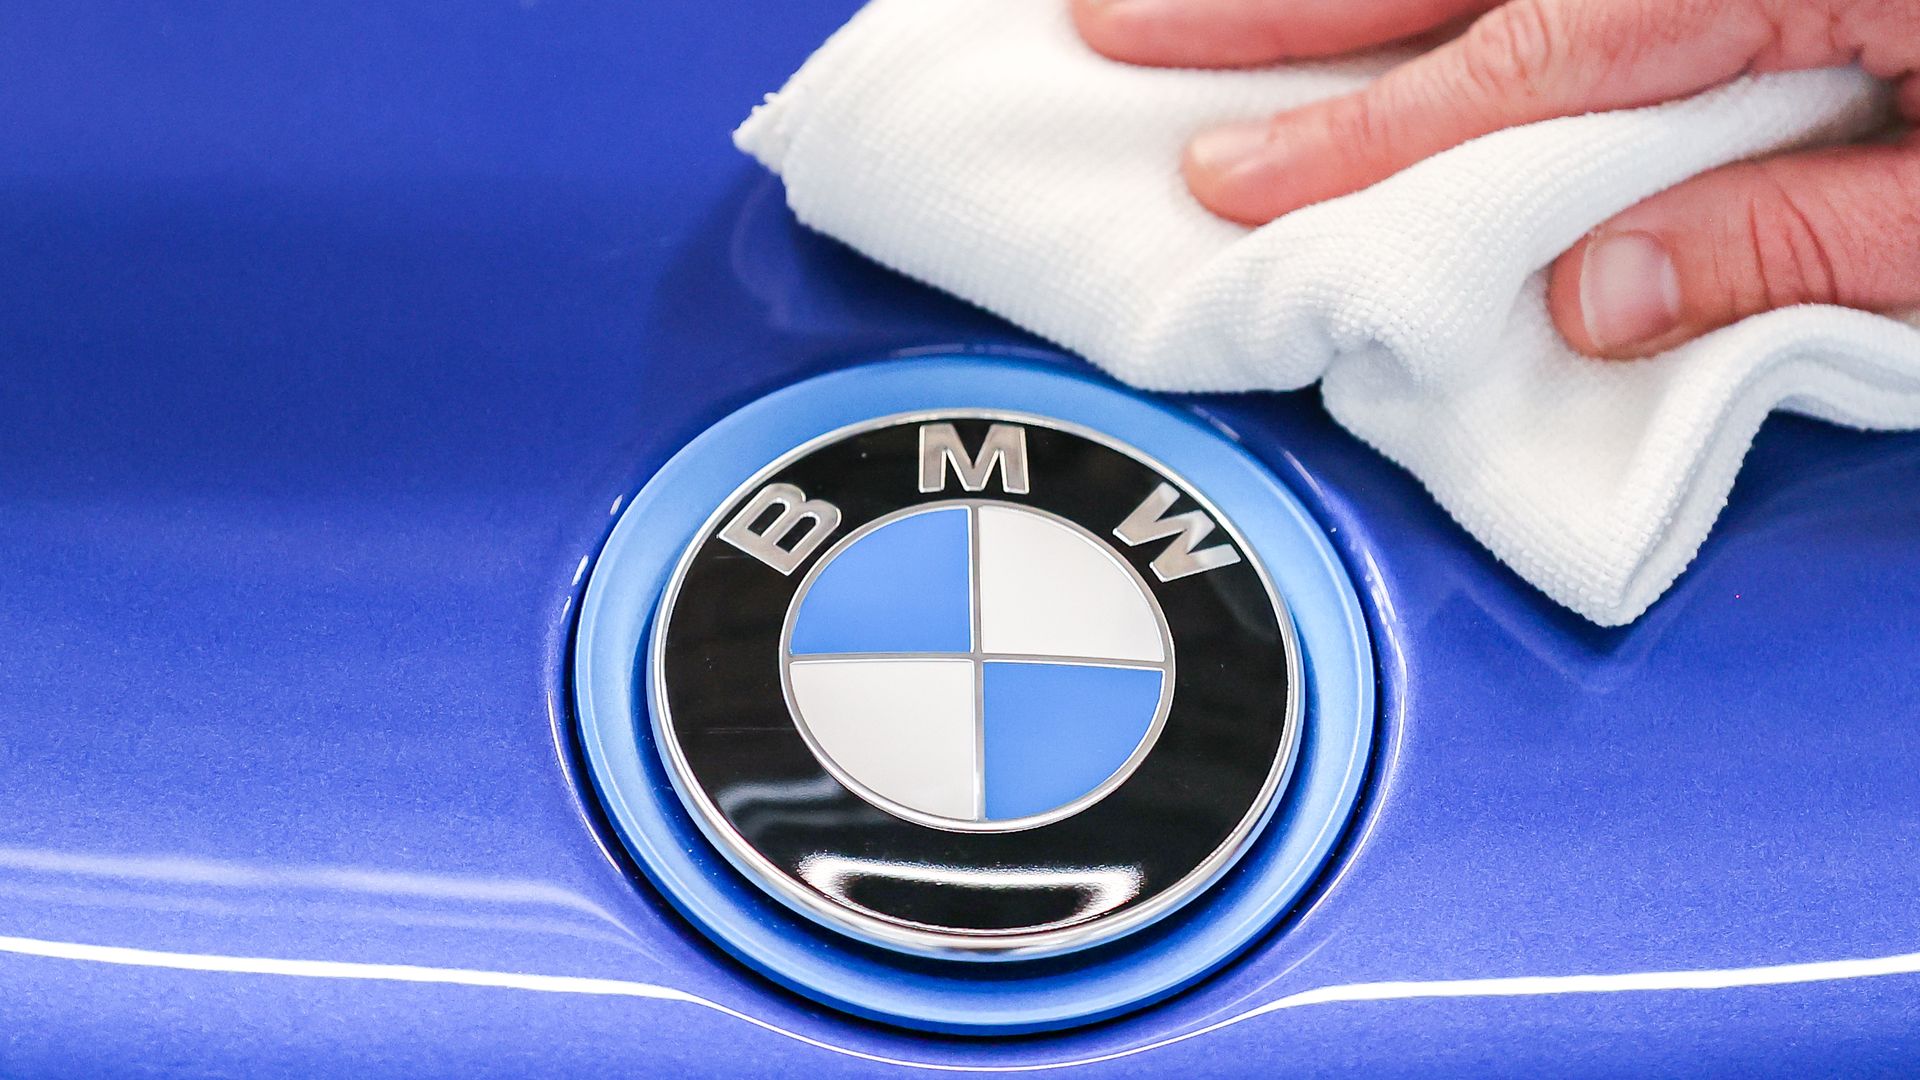 A hand wiping a car near the BMW logo with a white cloth